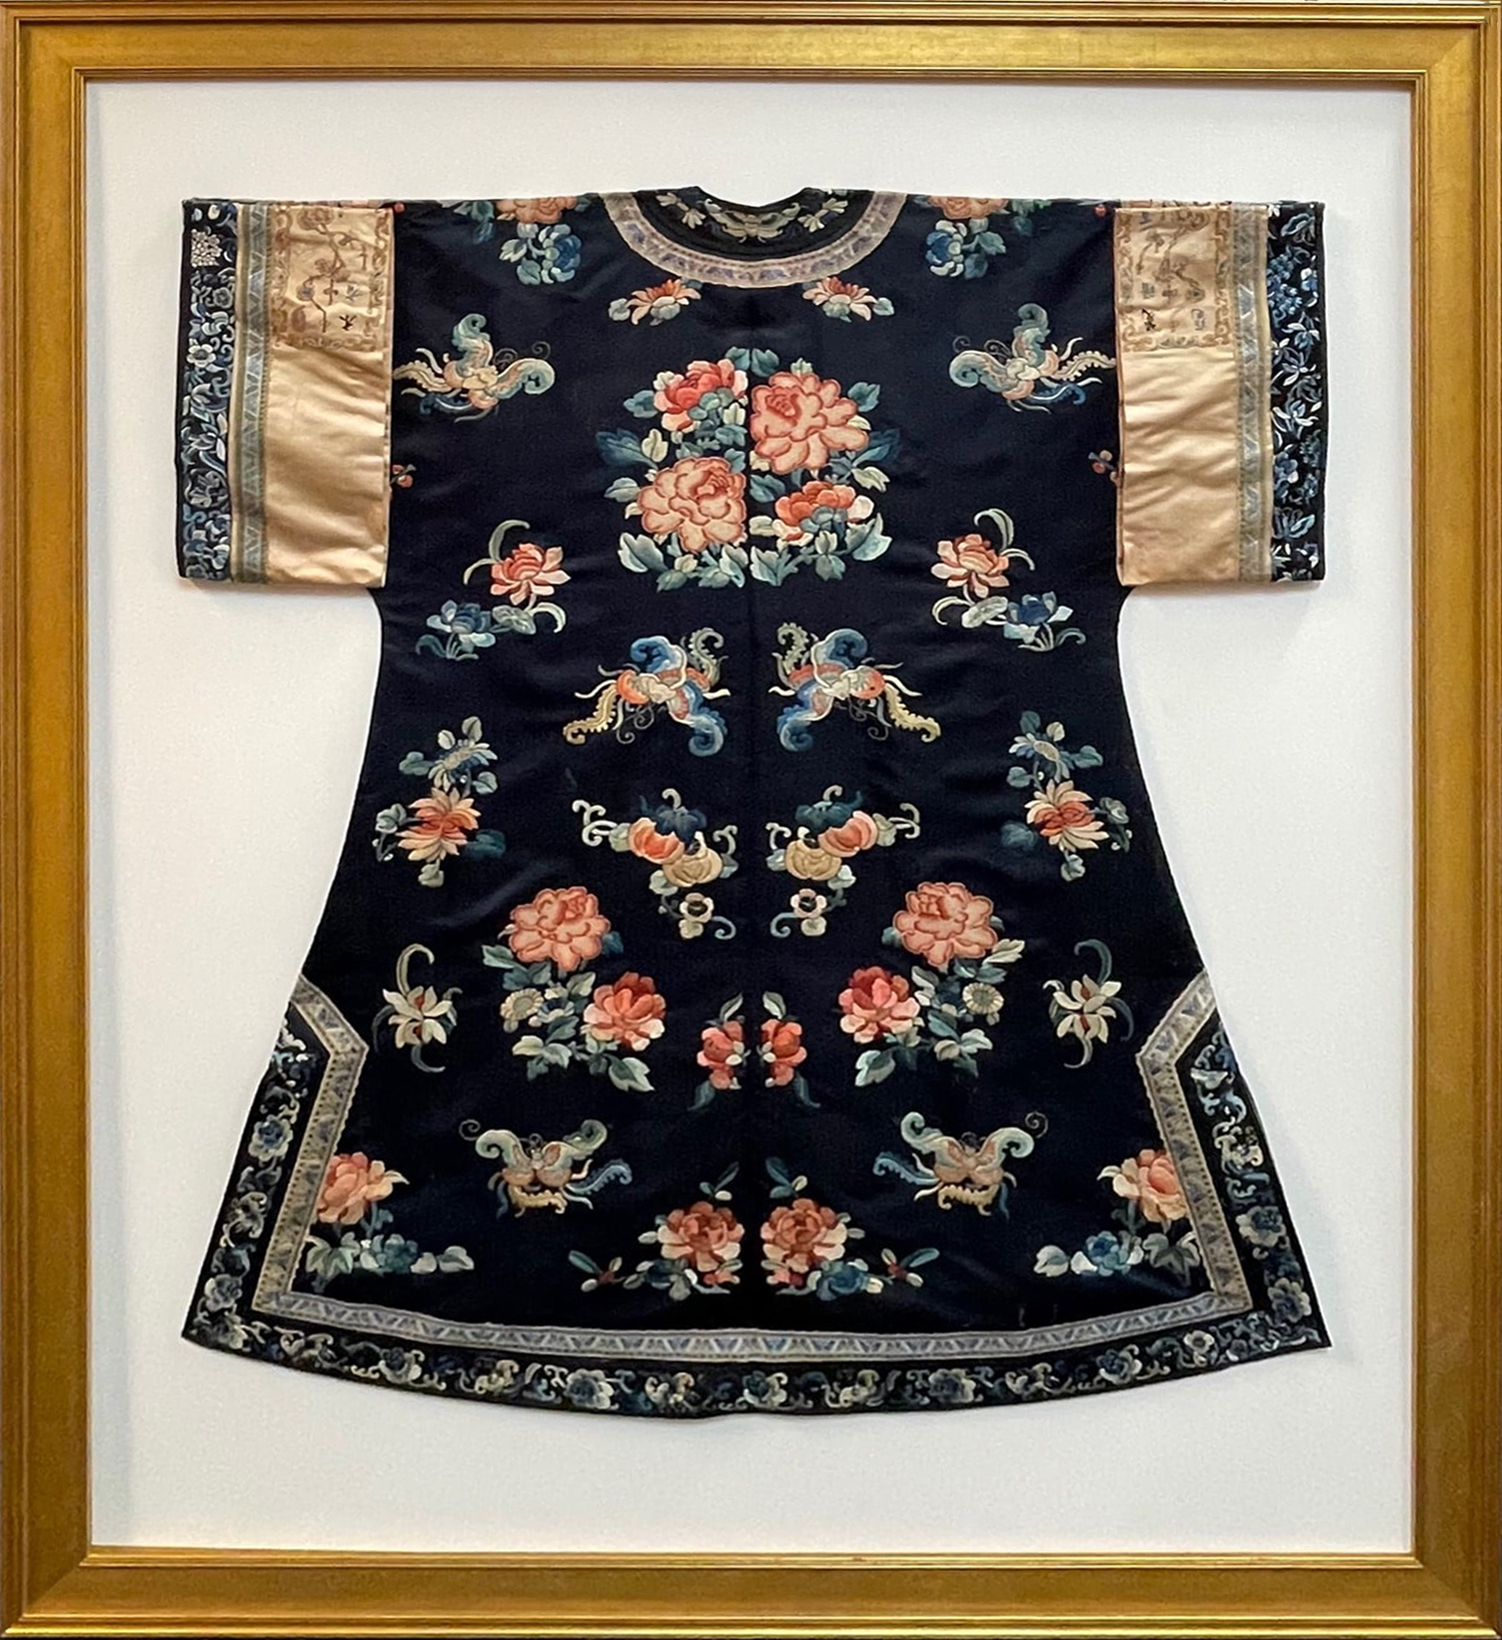 Framed article of clothing with floral pattern